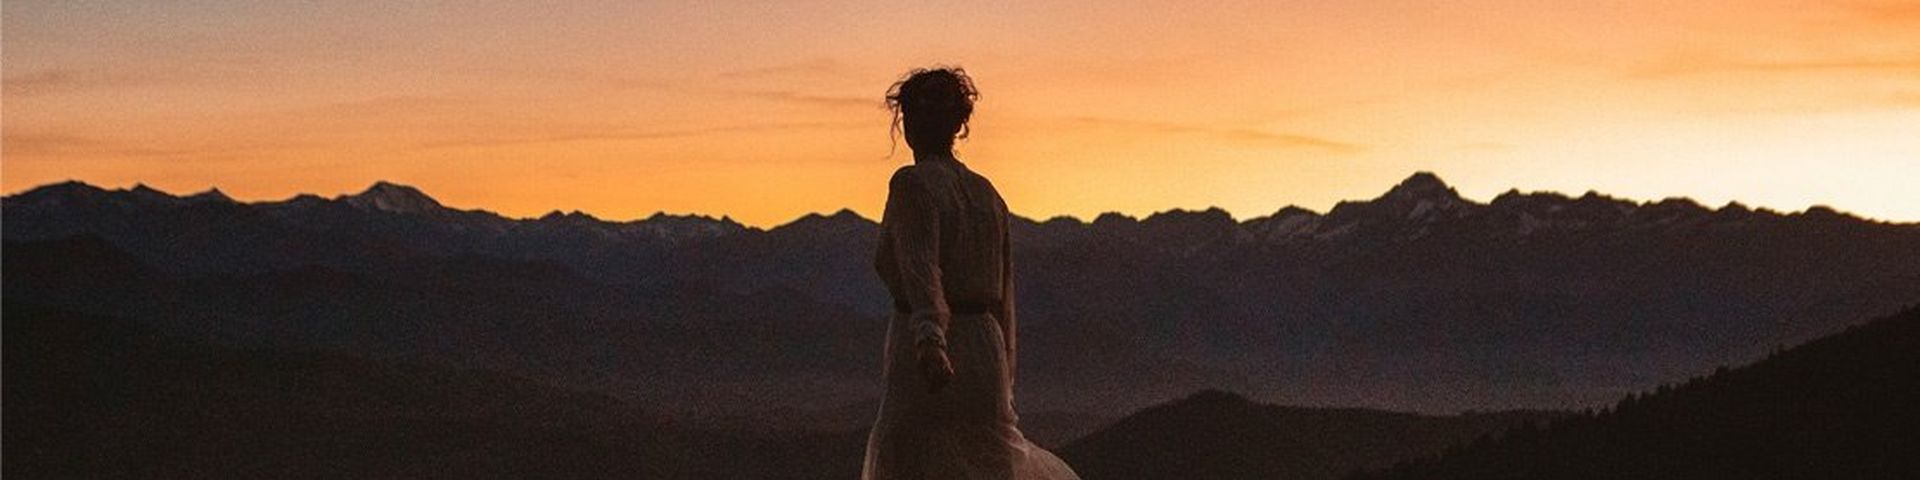 A woman stands with her back to the camera, watching an orange sunset over dark mountains. She wears a pale dress, and her hair is worn up, with tendrils outlined in shadow.